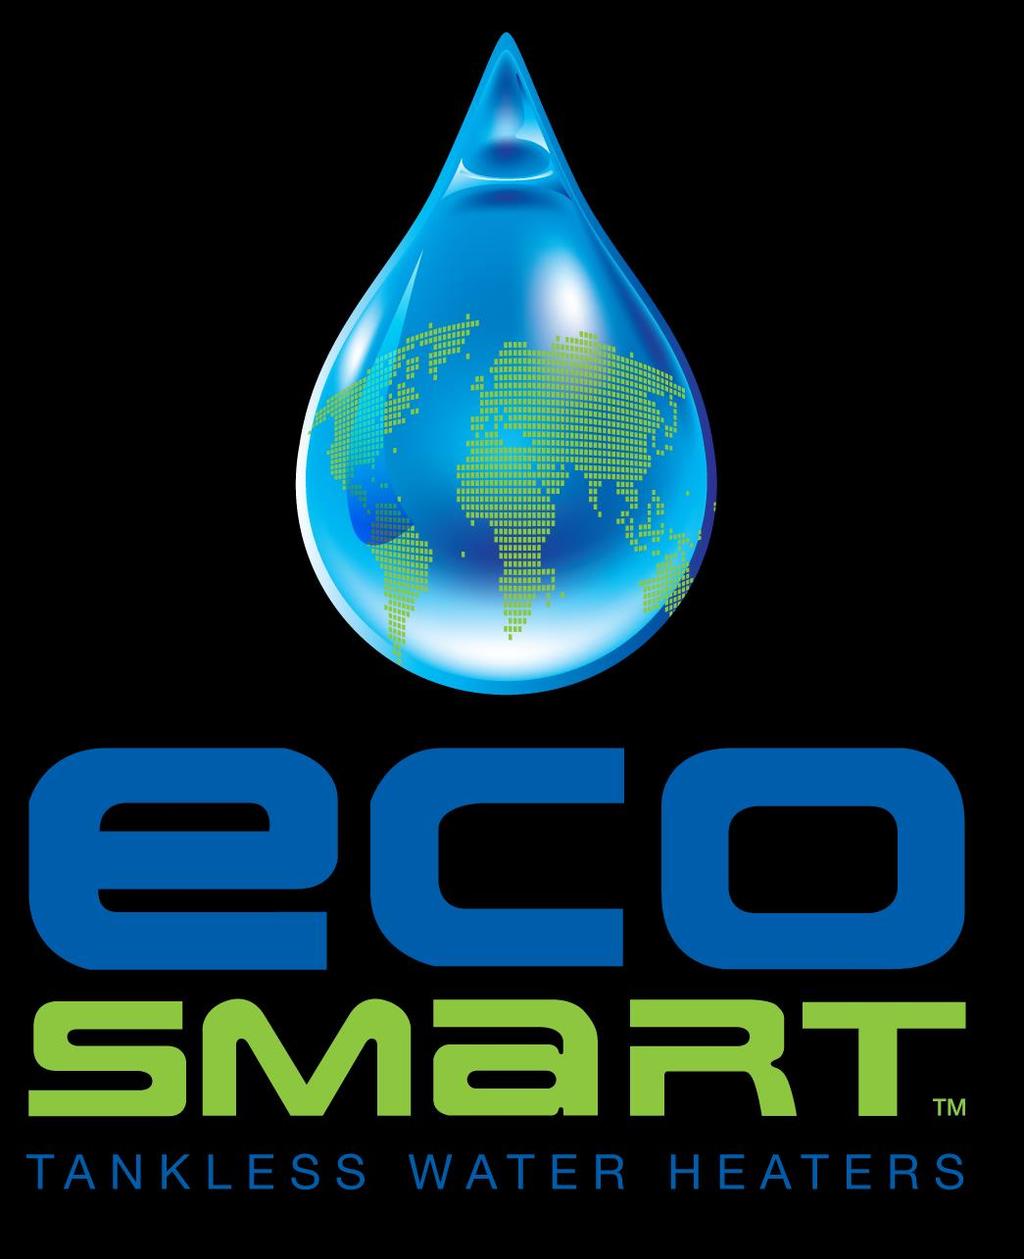 EcoSmart Troubleshooting Guide Models POU 3.5 & 6 kw This guide is designed for installers or homeowners to help troubleshoot any issues experienced during the lifetime of the tankless water heater.